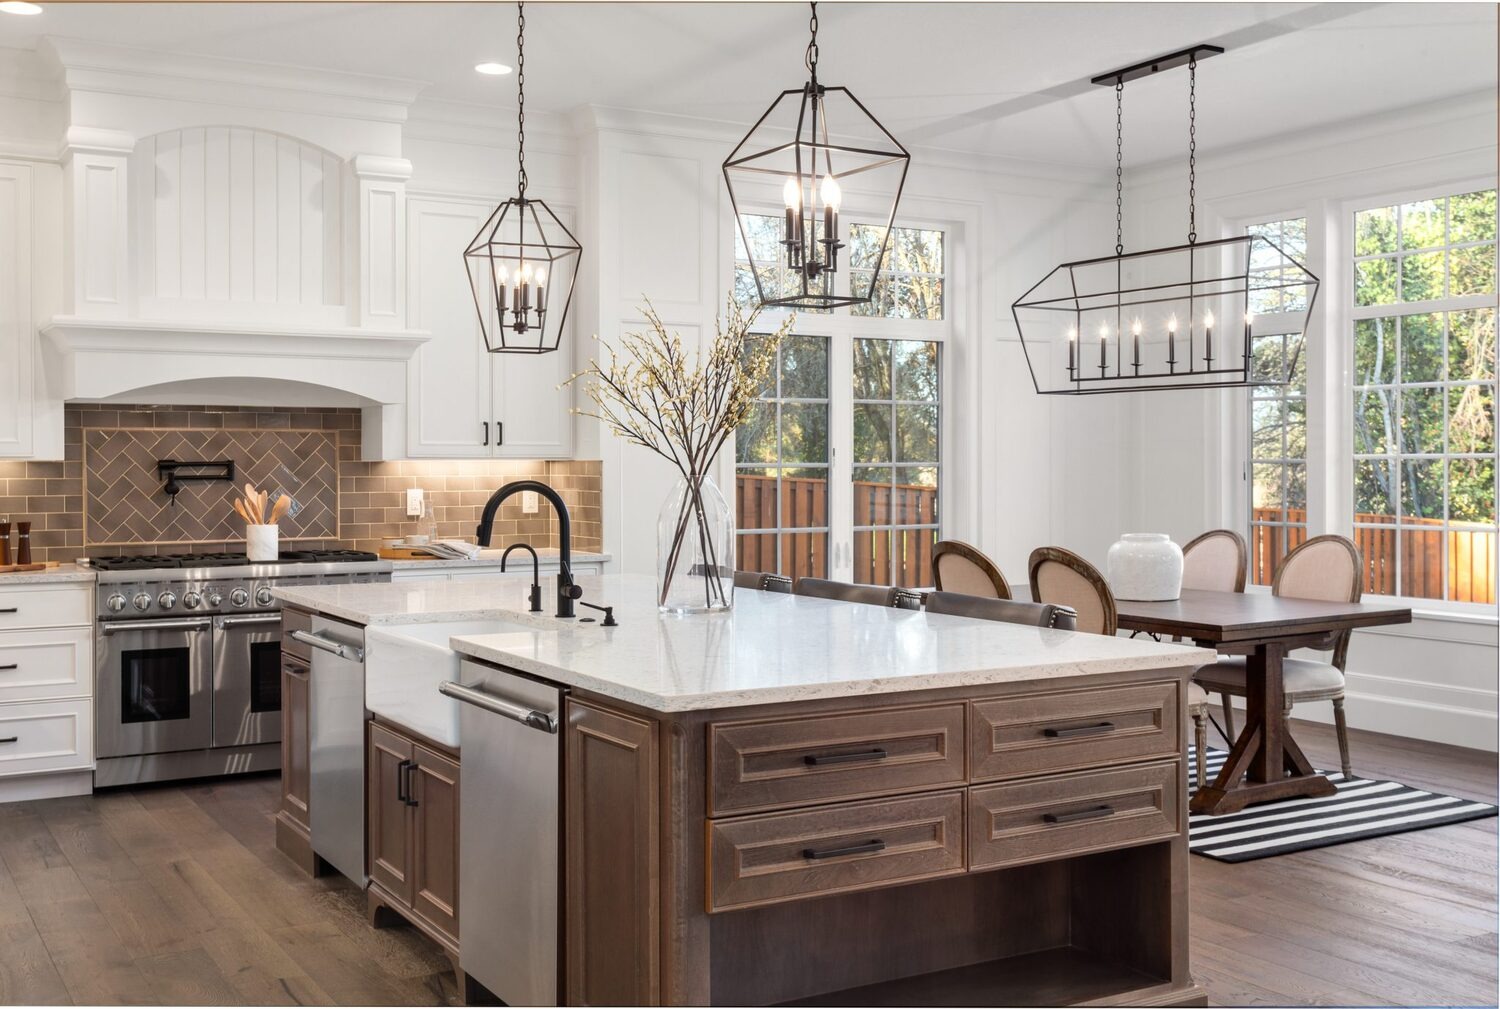 Thanks to the kitchen remodeling Skokie project, the traditional kitchen boasts beautiful white and brown wooden accents